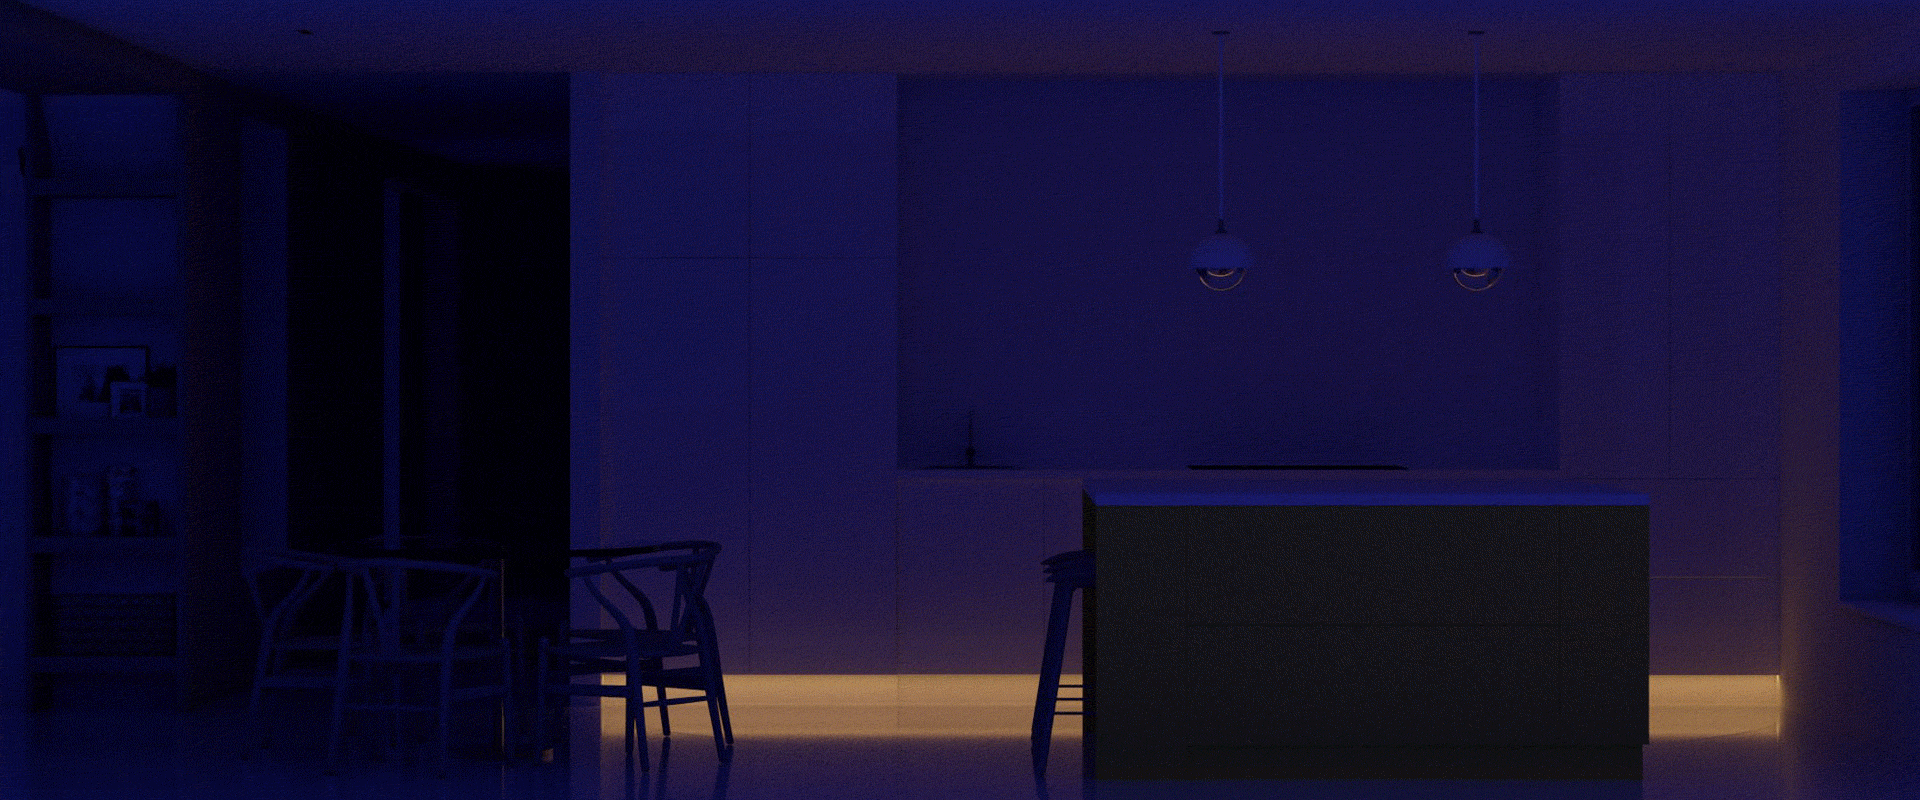 Interactive Lighting Simulator: Animated gif showing the various lighting scenes in a modern open plan kitchen dining room